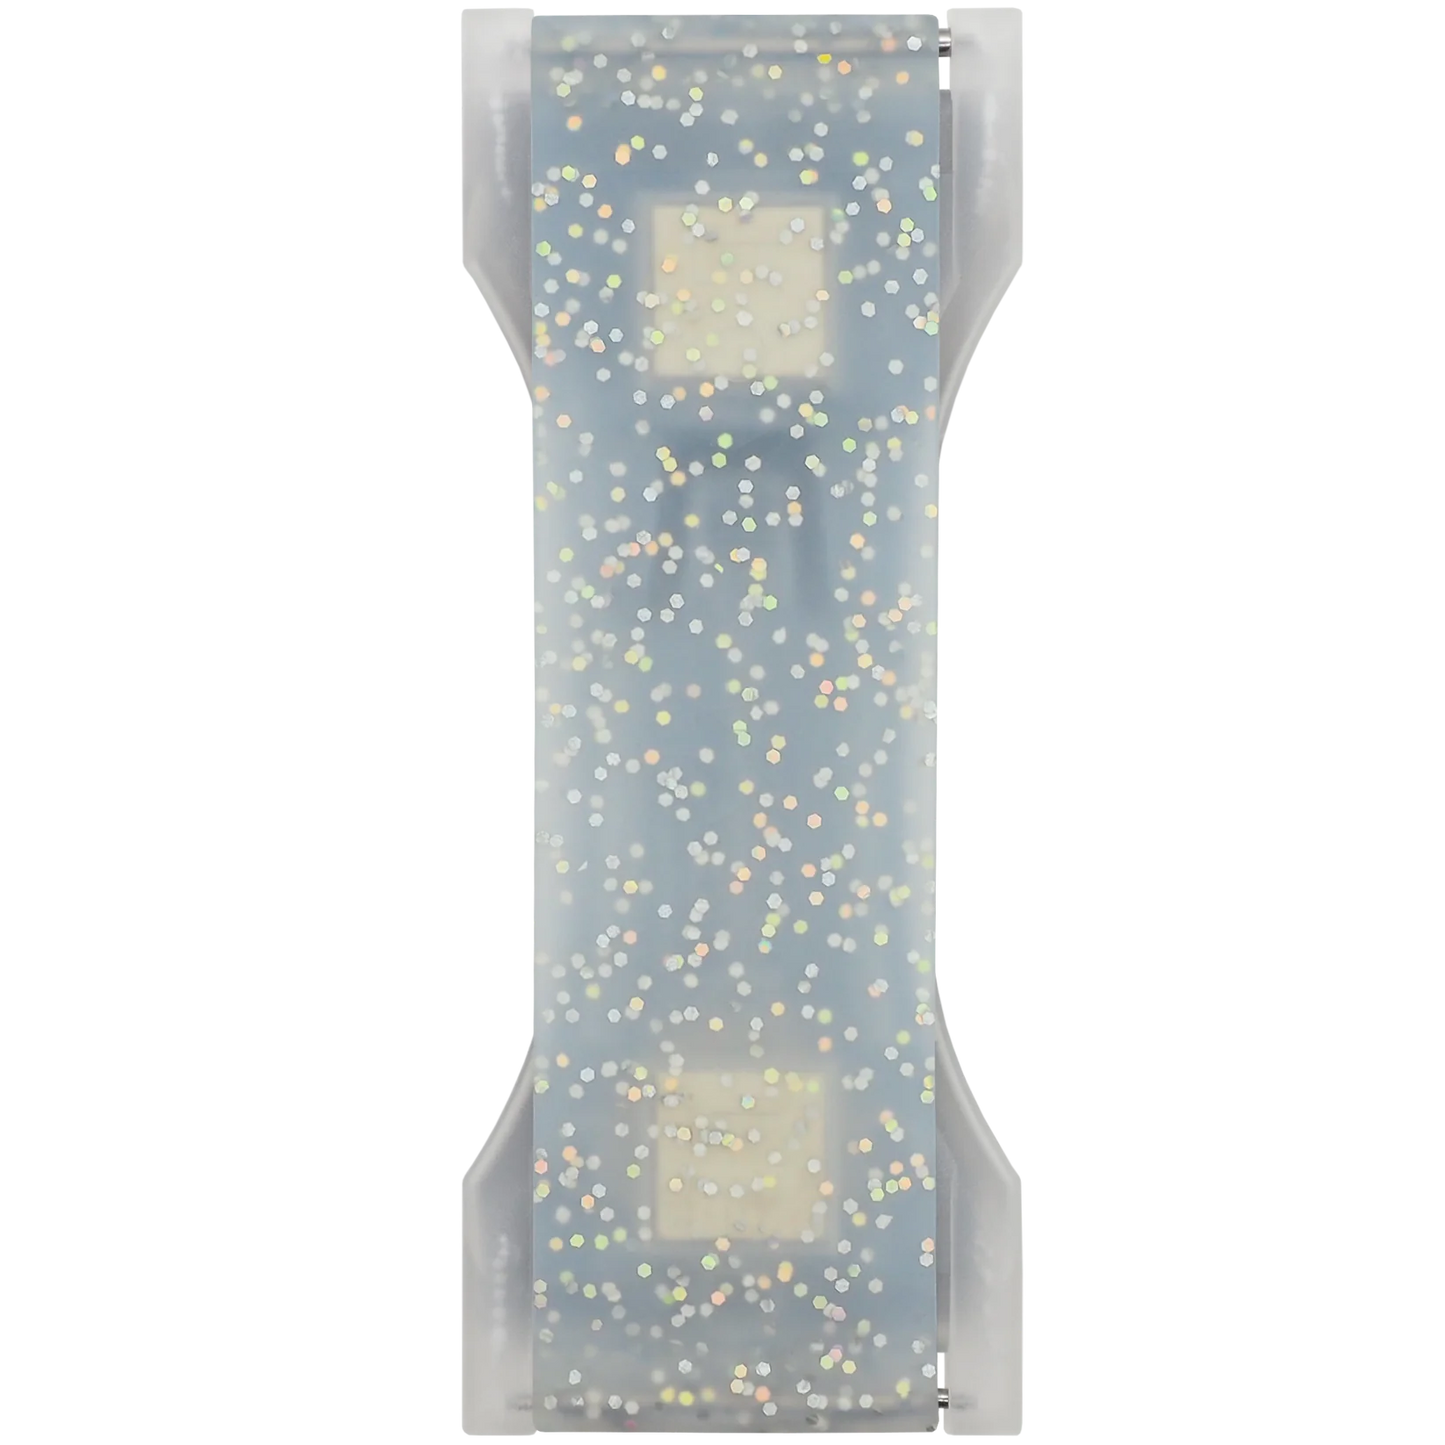 Opal Glitter Silicone LoveHandle Pro Phone Grip